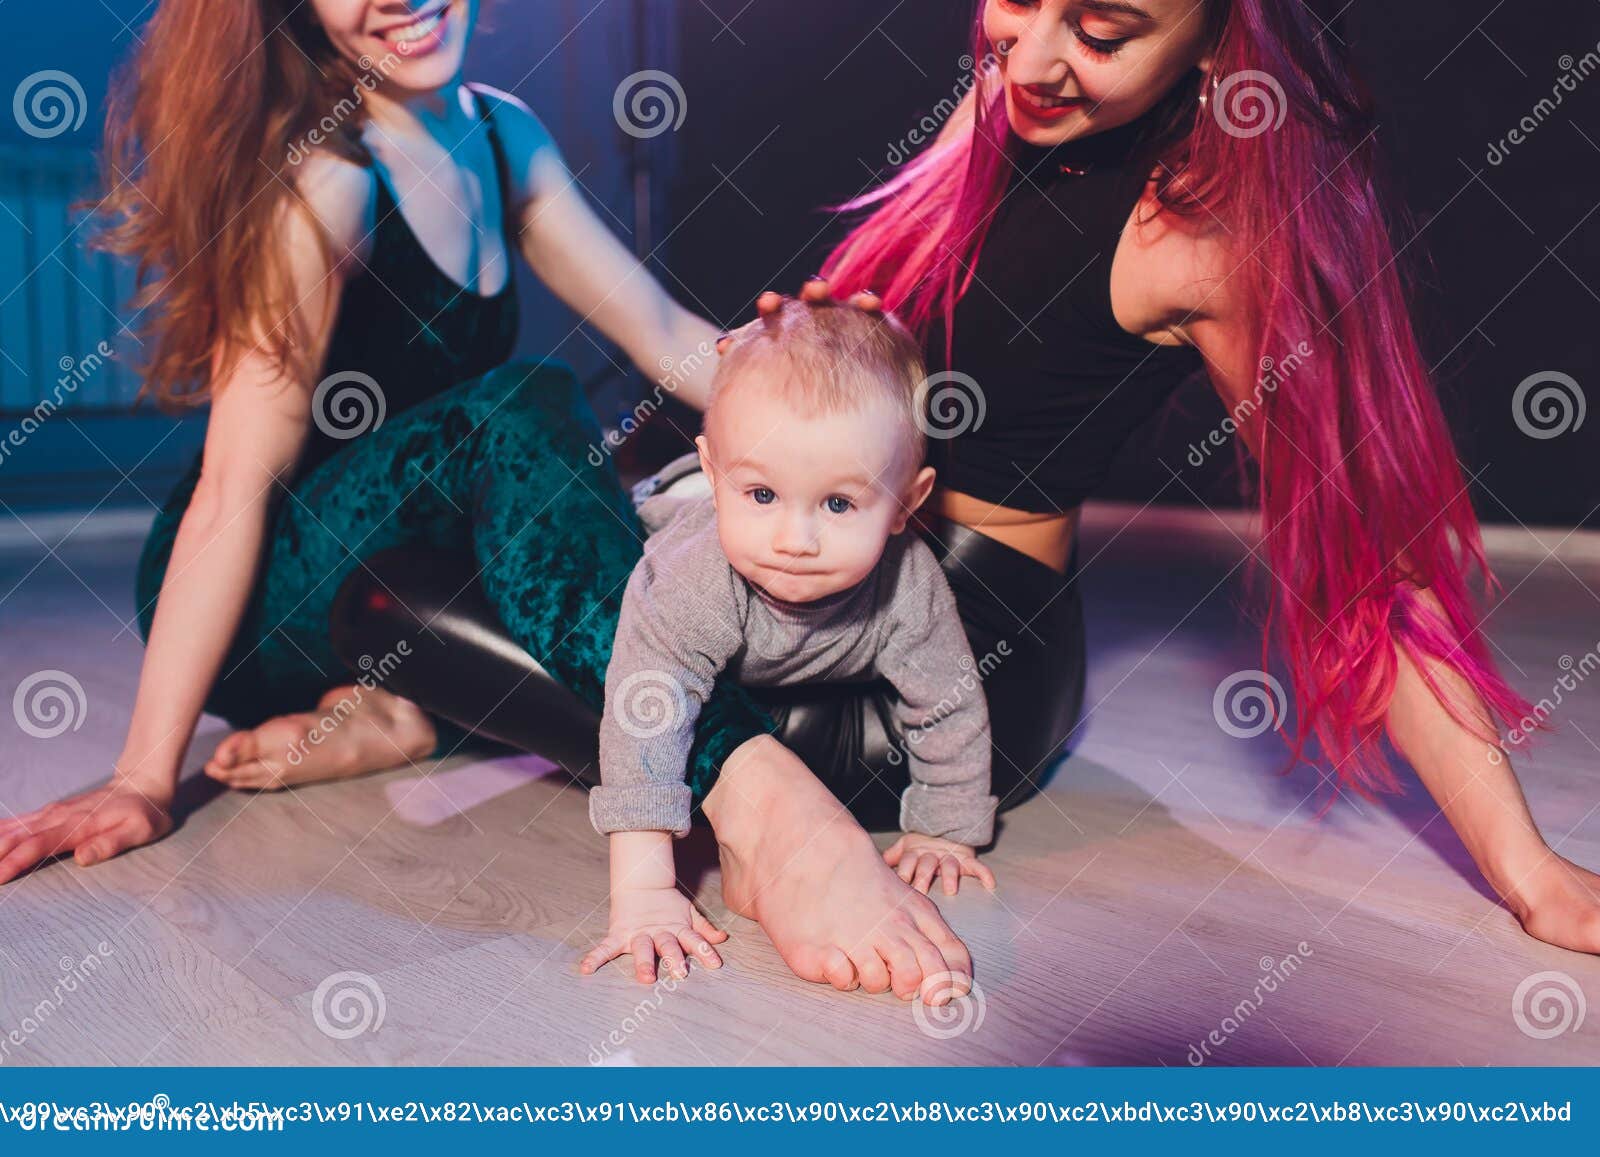 Two Young Women with Dyed Red Hair and in Casual Clothes with a Baby